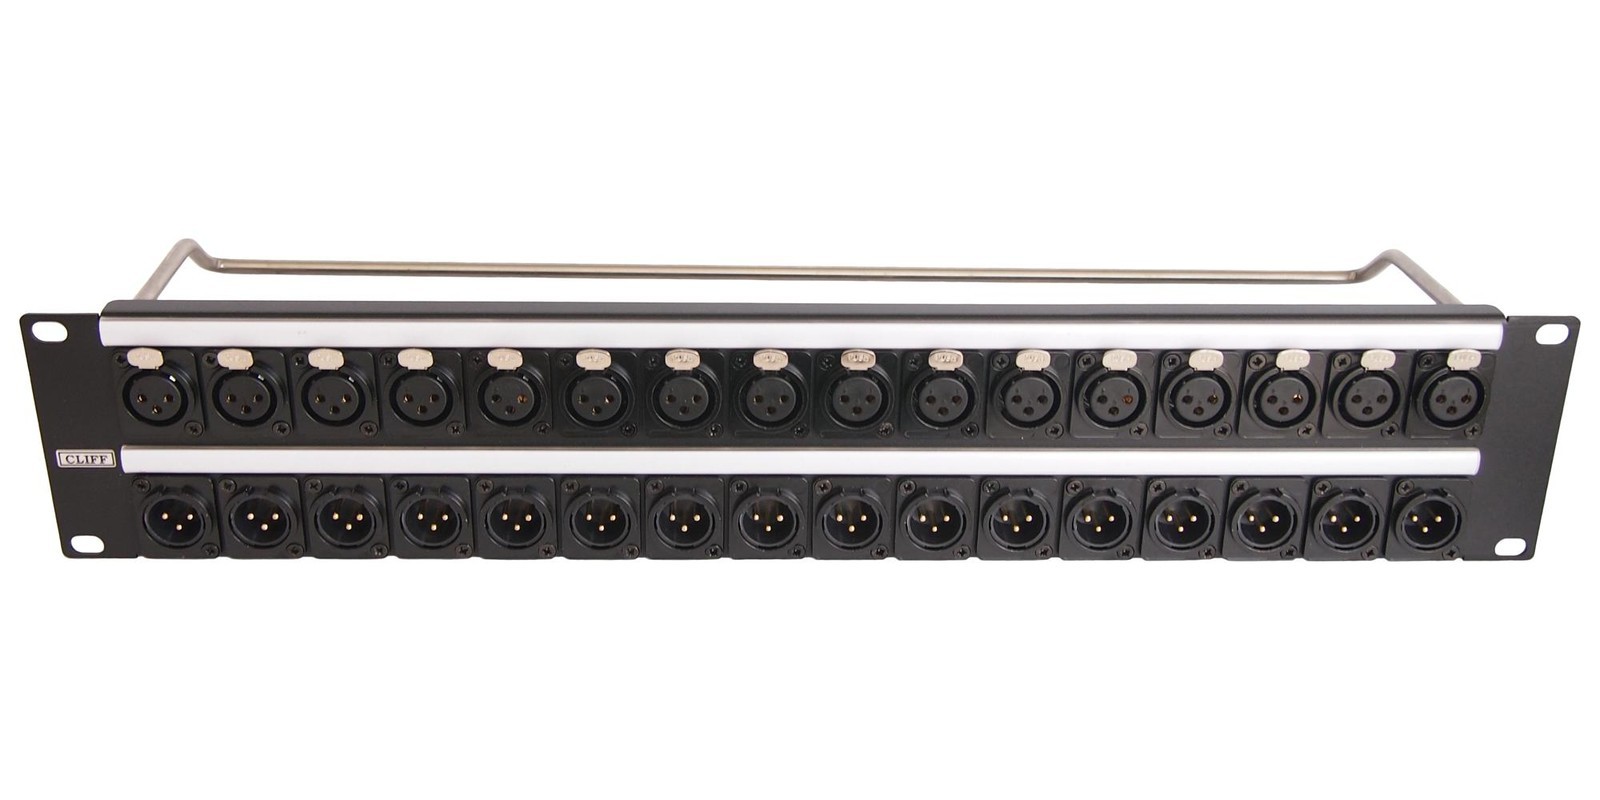 Cliff Electronic Components Cp30192 Patch Panel, Xlr, 96Port, 2U